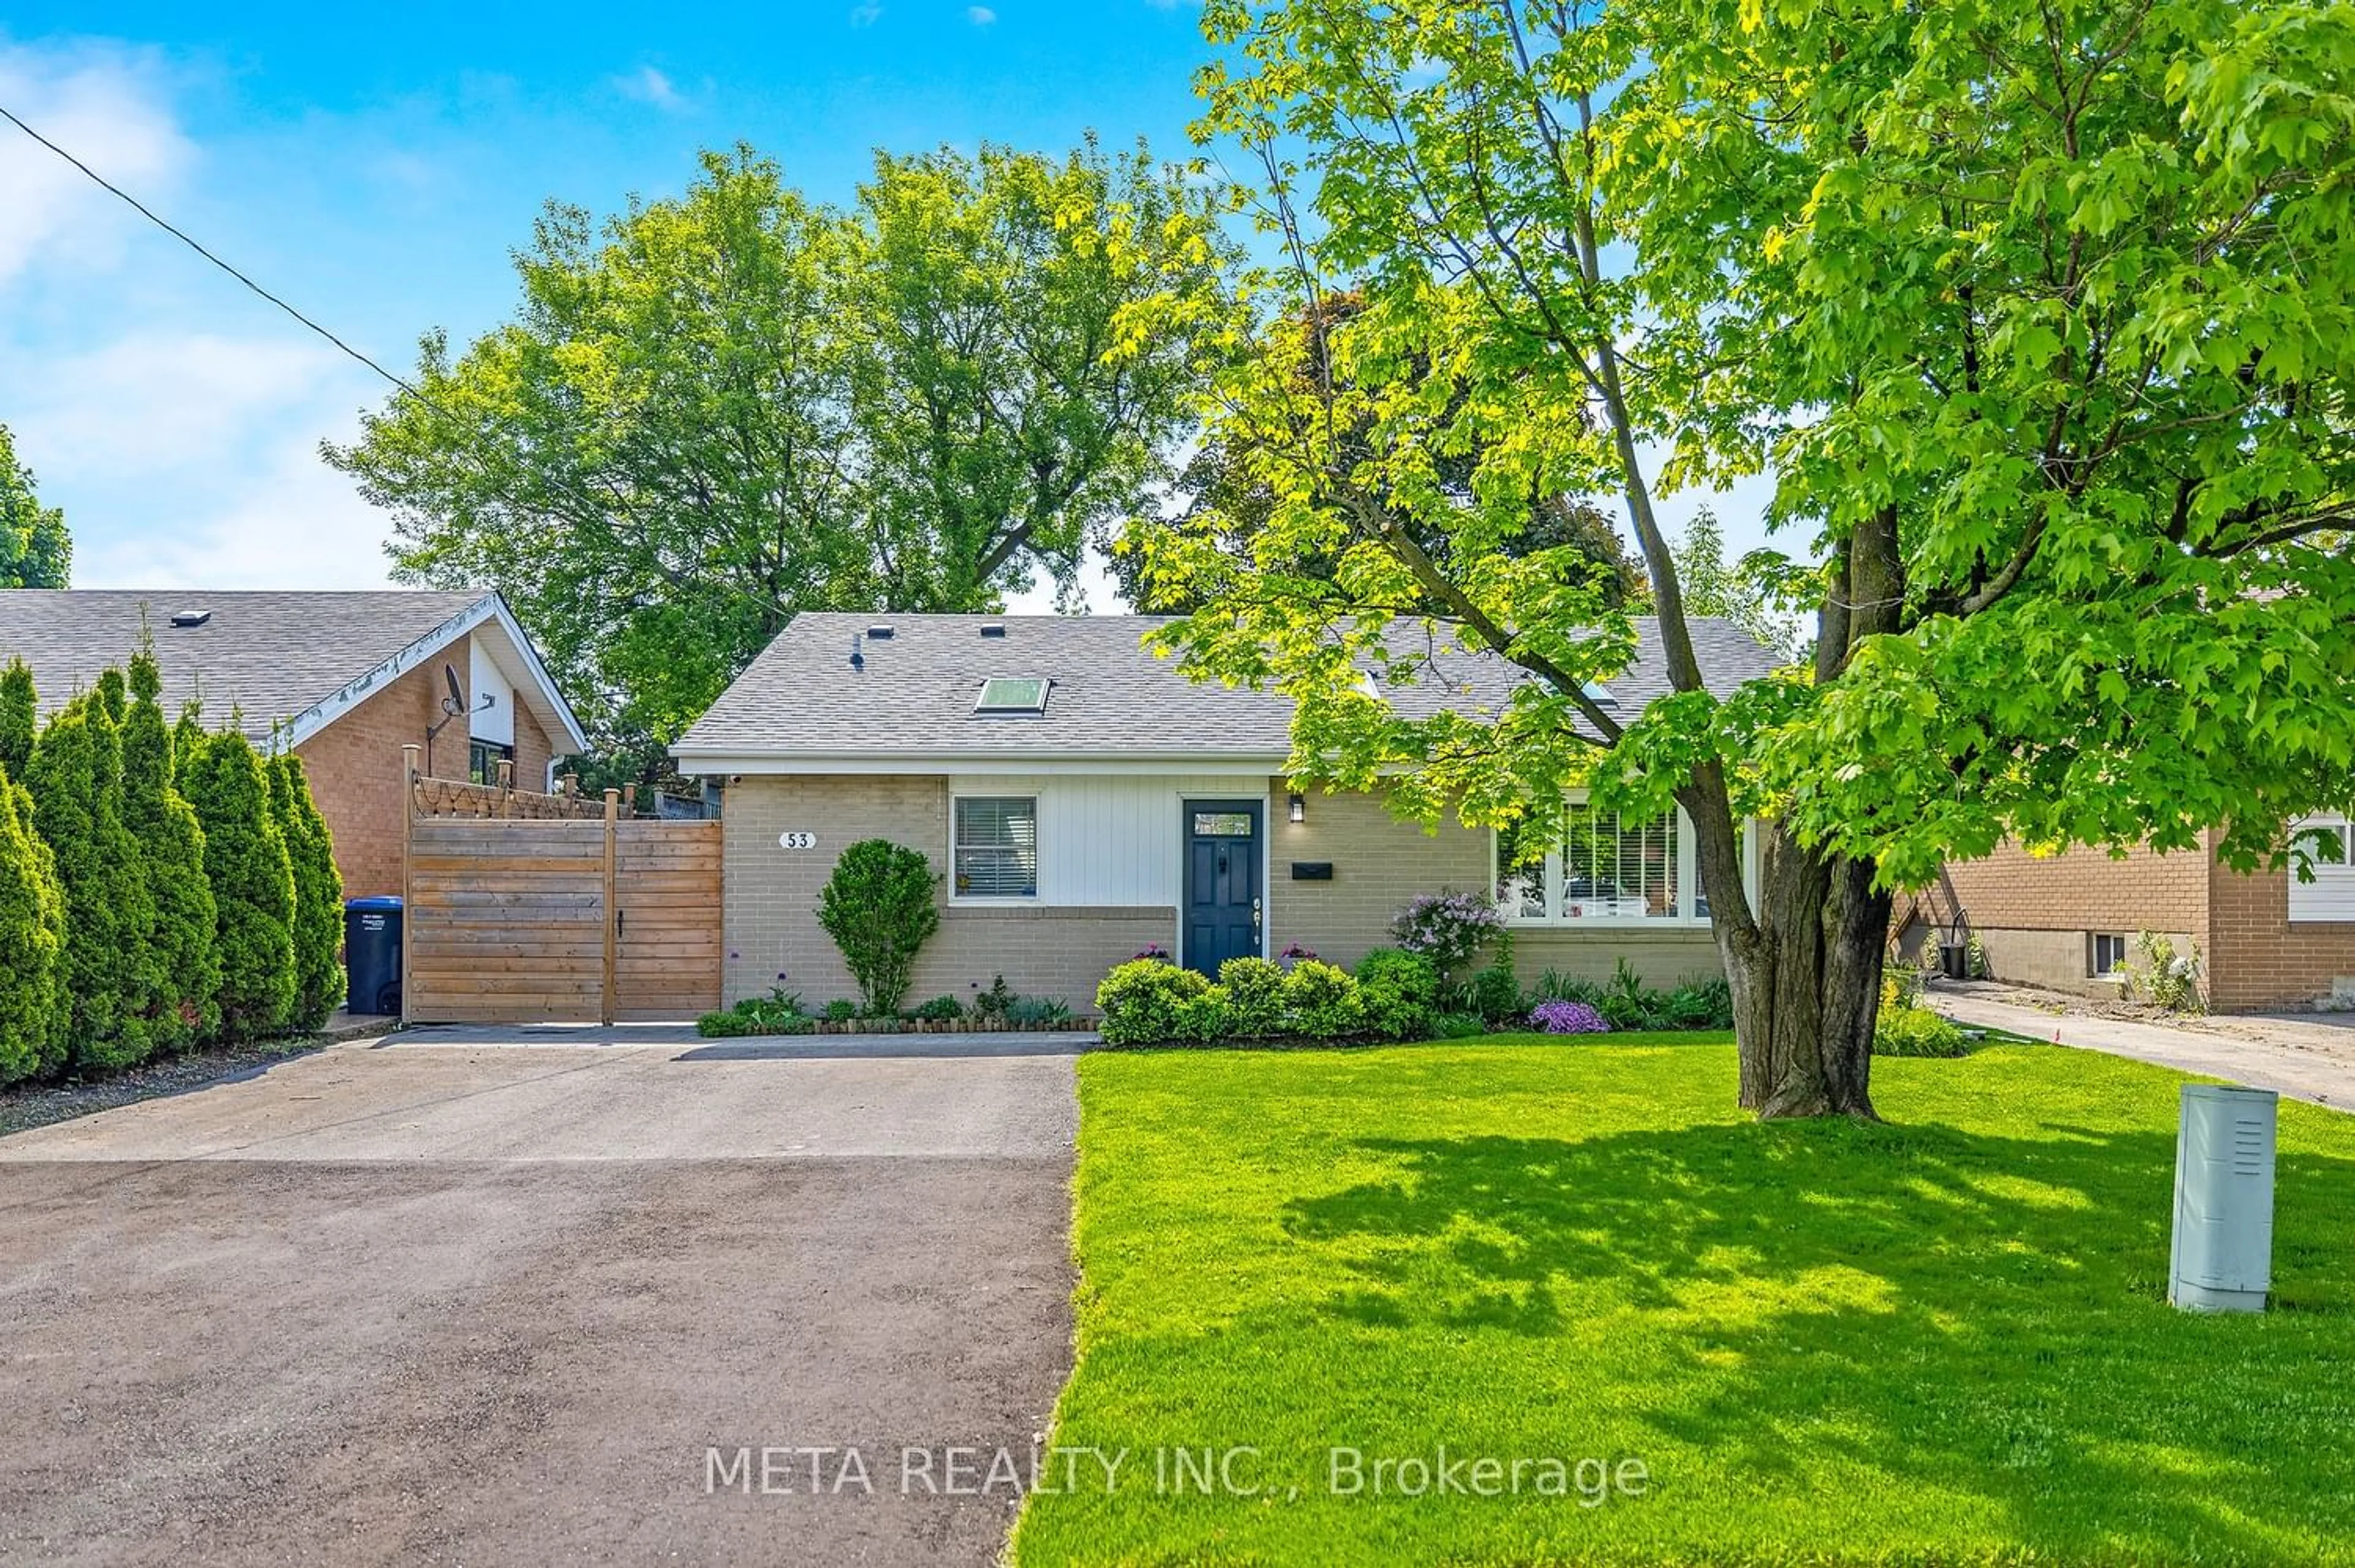 Frontside or backside of a home for 53 Nanwood Dr, Brampton Ontario L6W 1M1